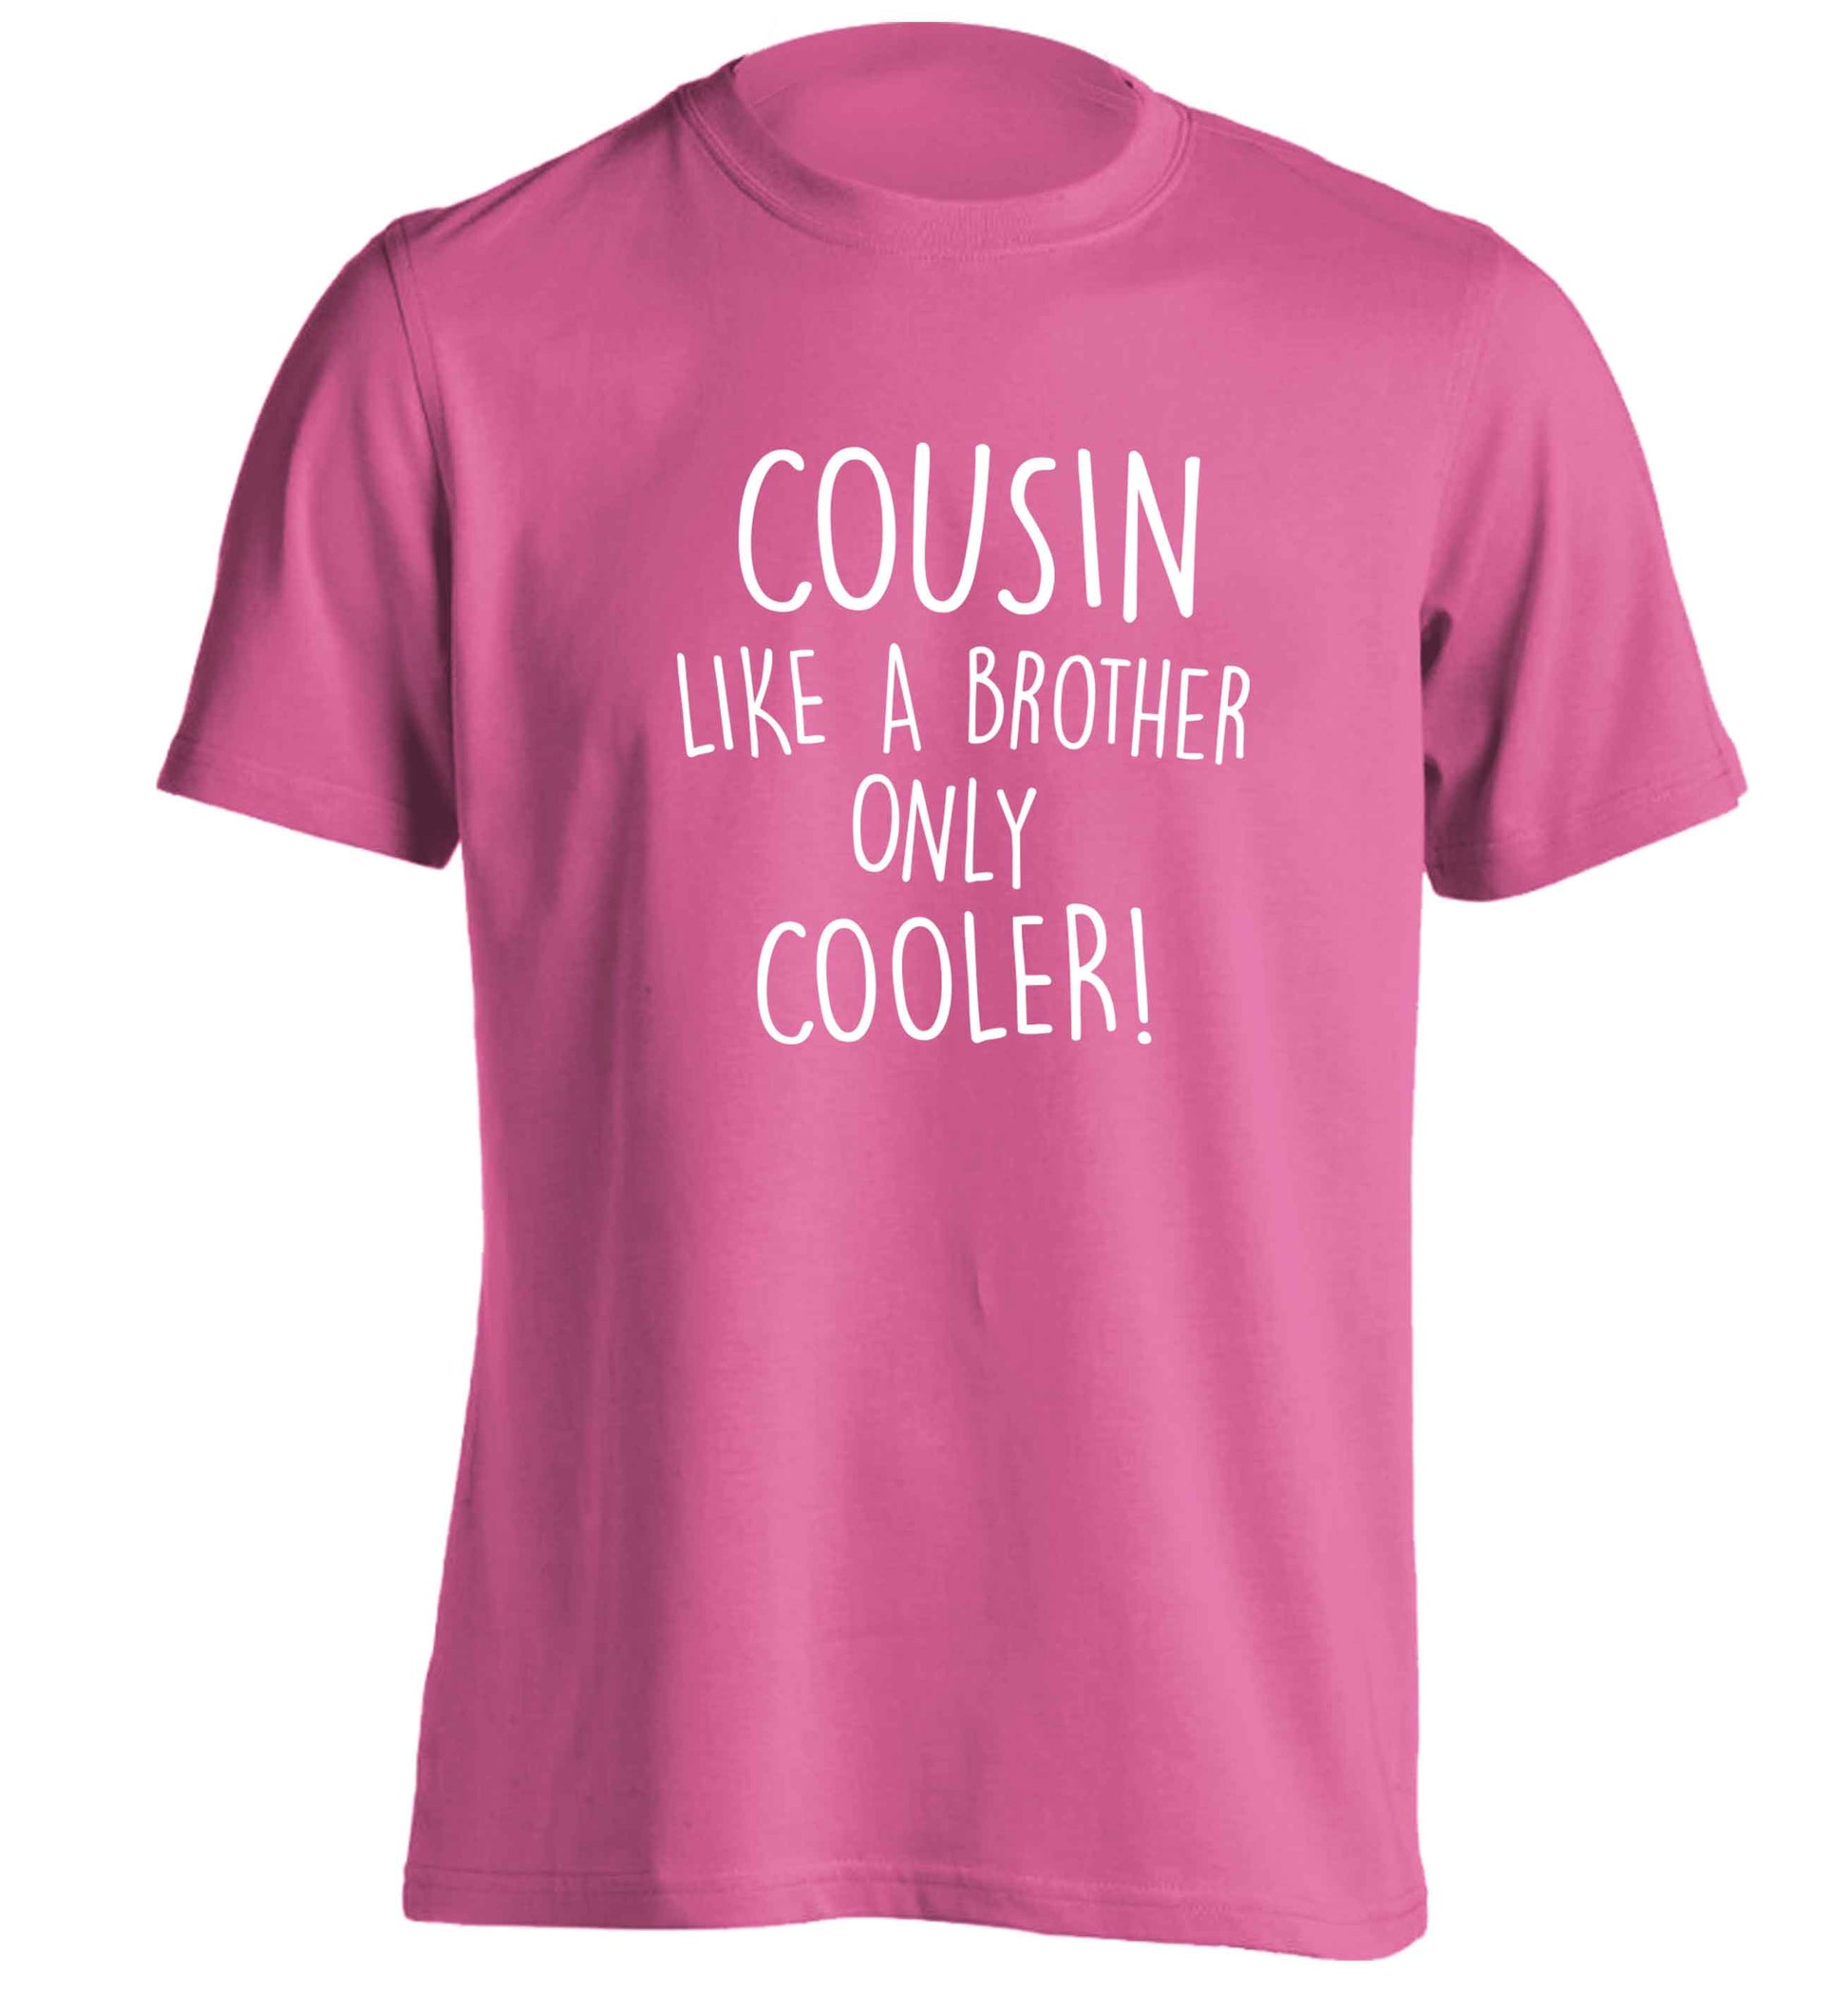 Cousin like a brother only cooler adults unisex pink Tshirt 2XL